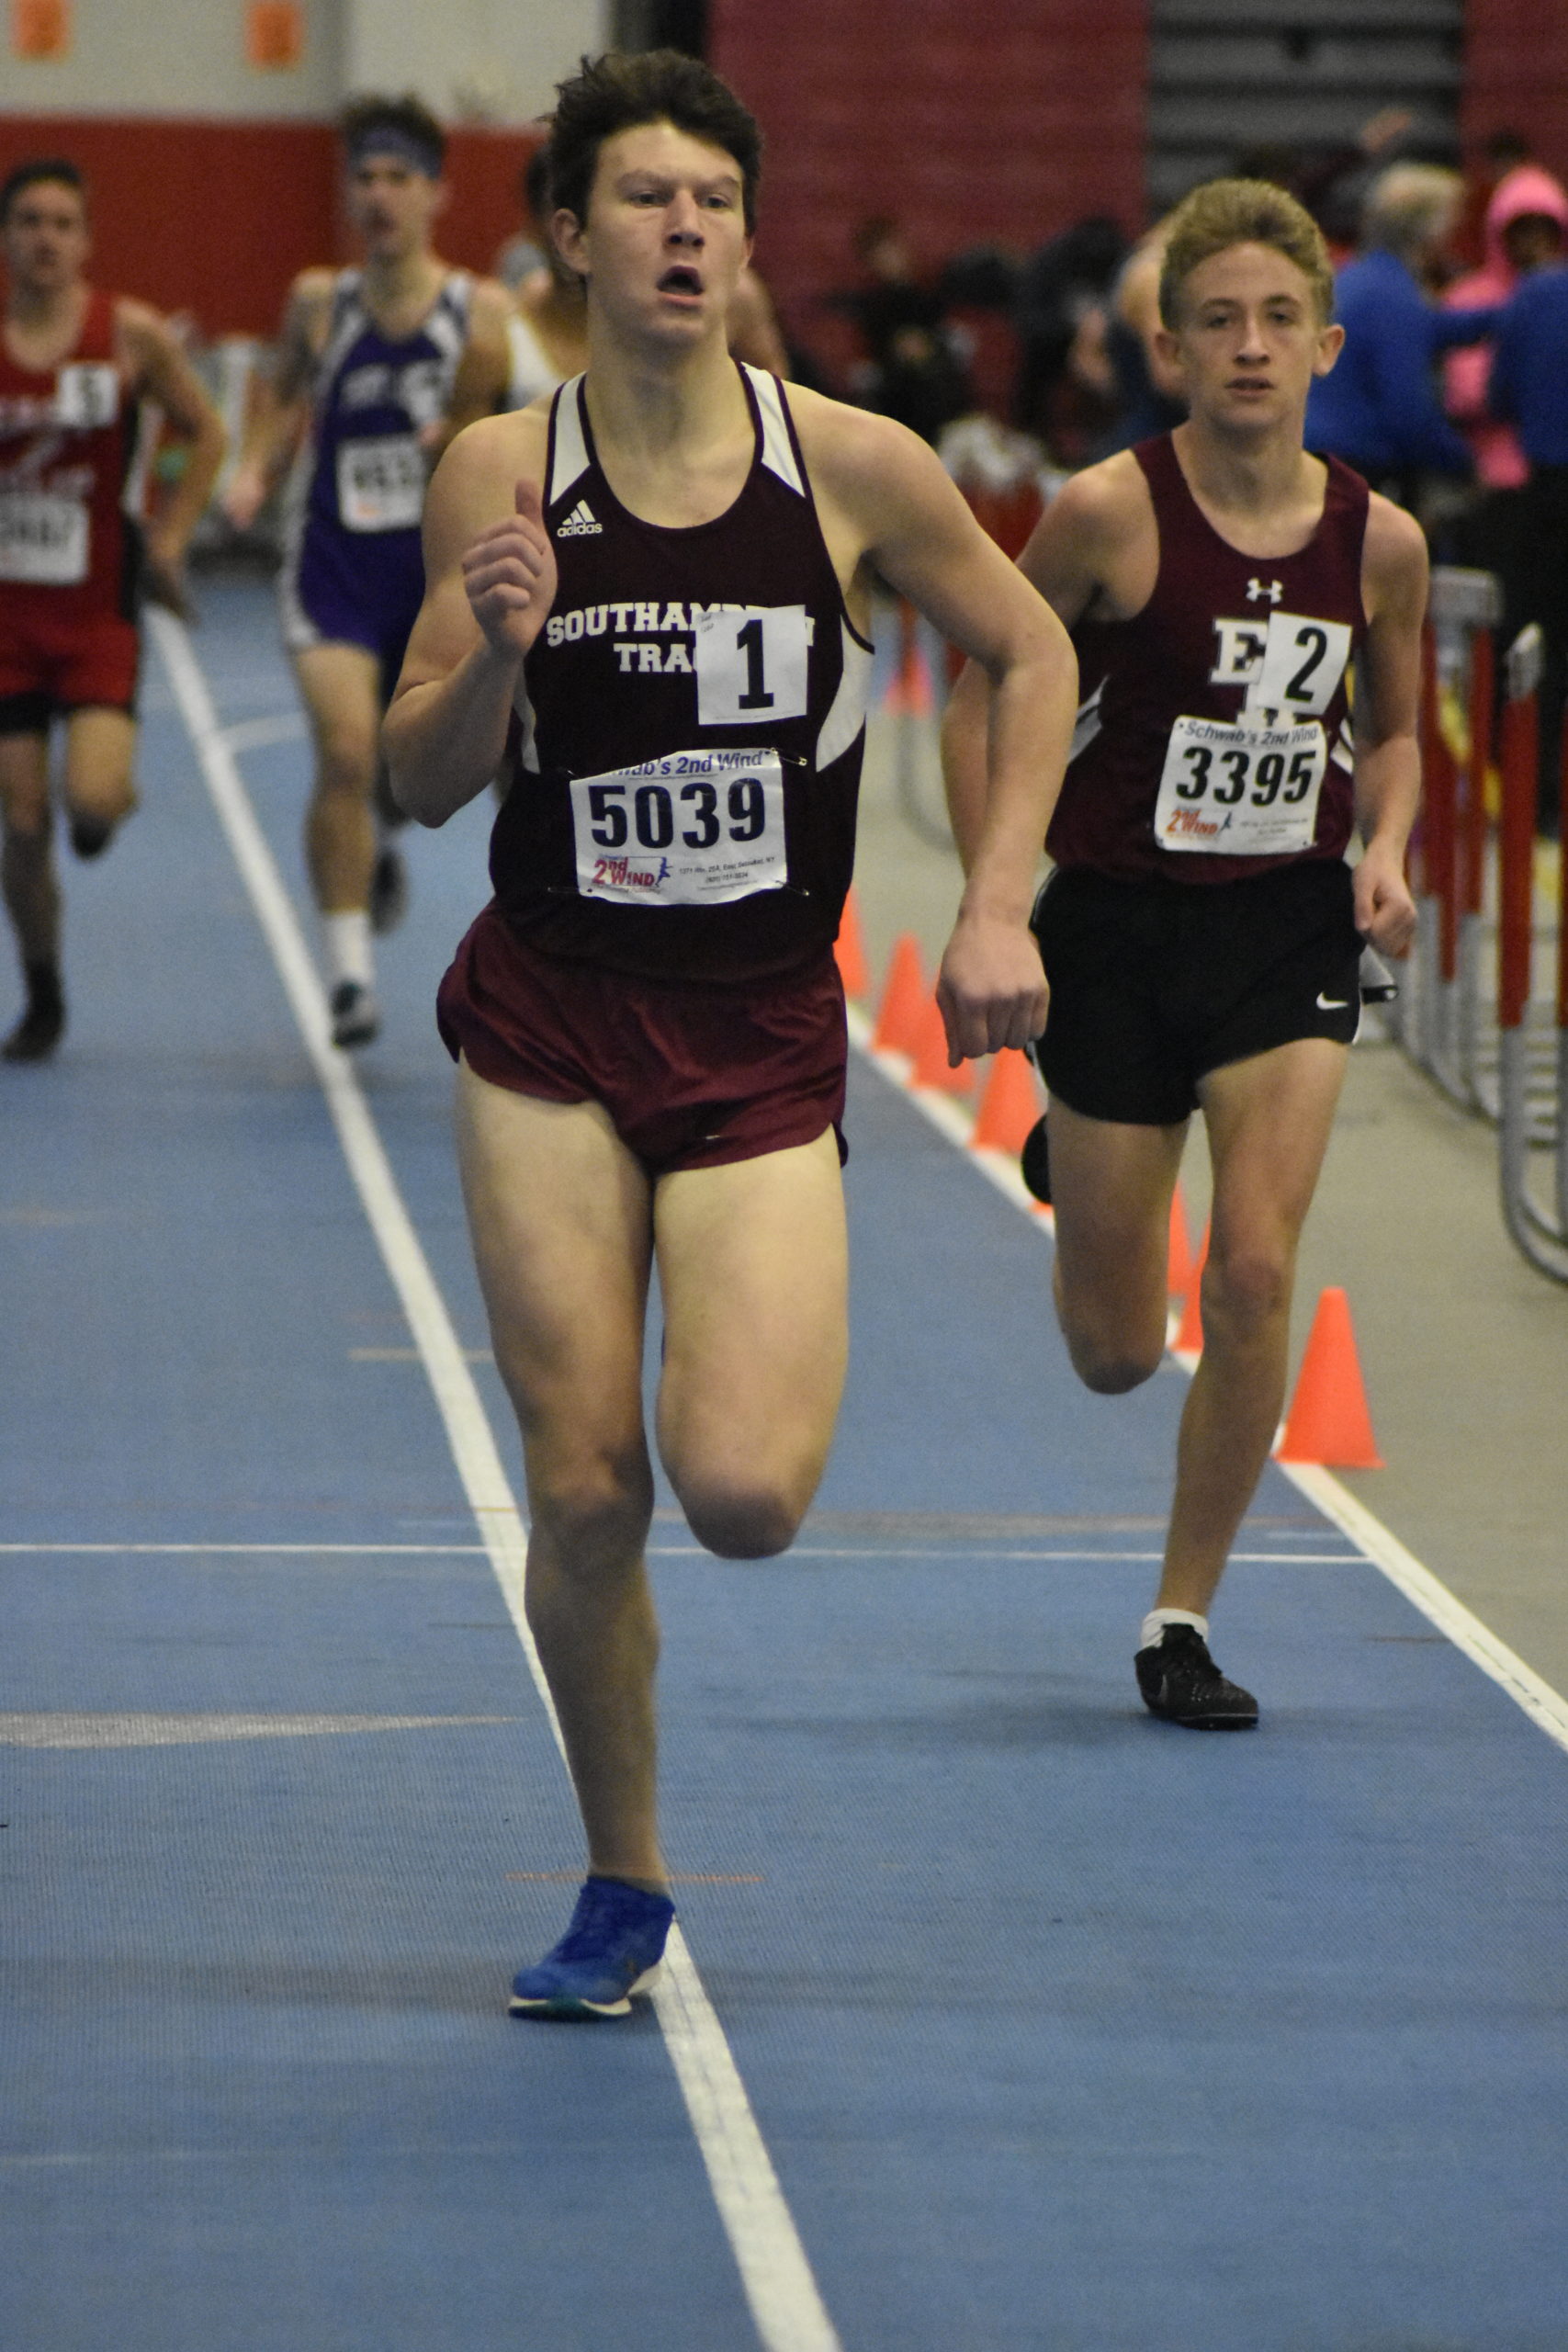 Mariner Griffin Schwartz with an early lead in the 1,000-meter race.